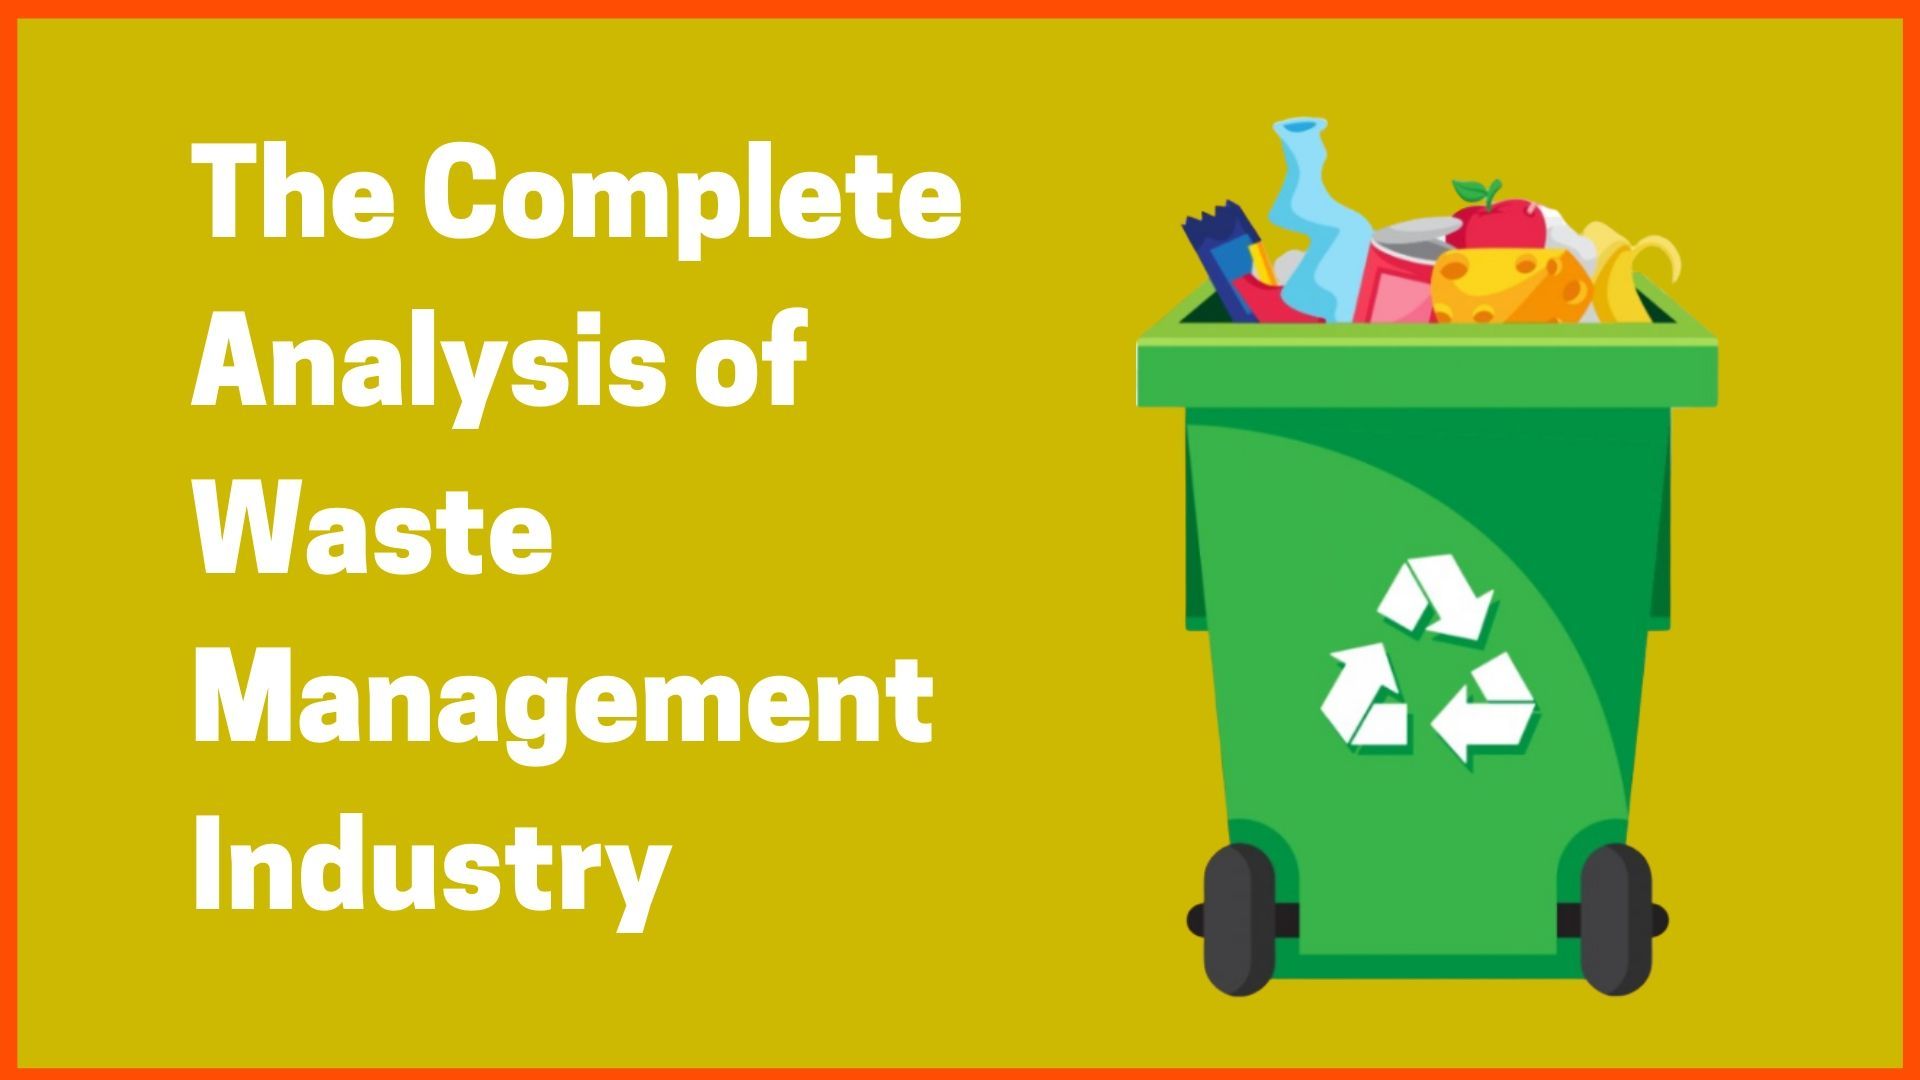 The Complete Analysis of Waste Management Industry